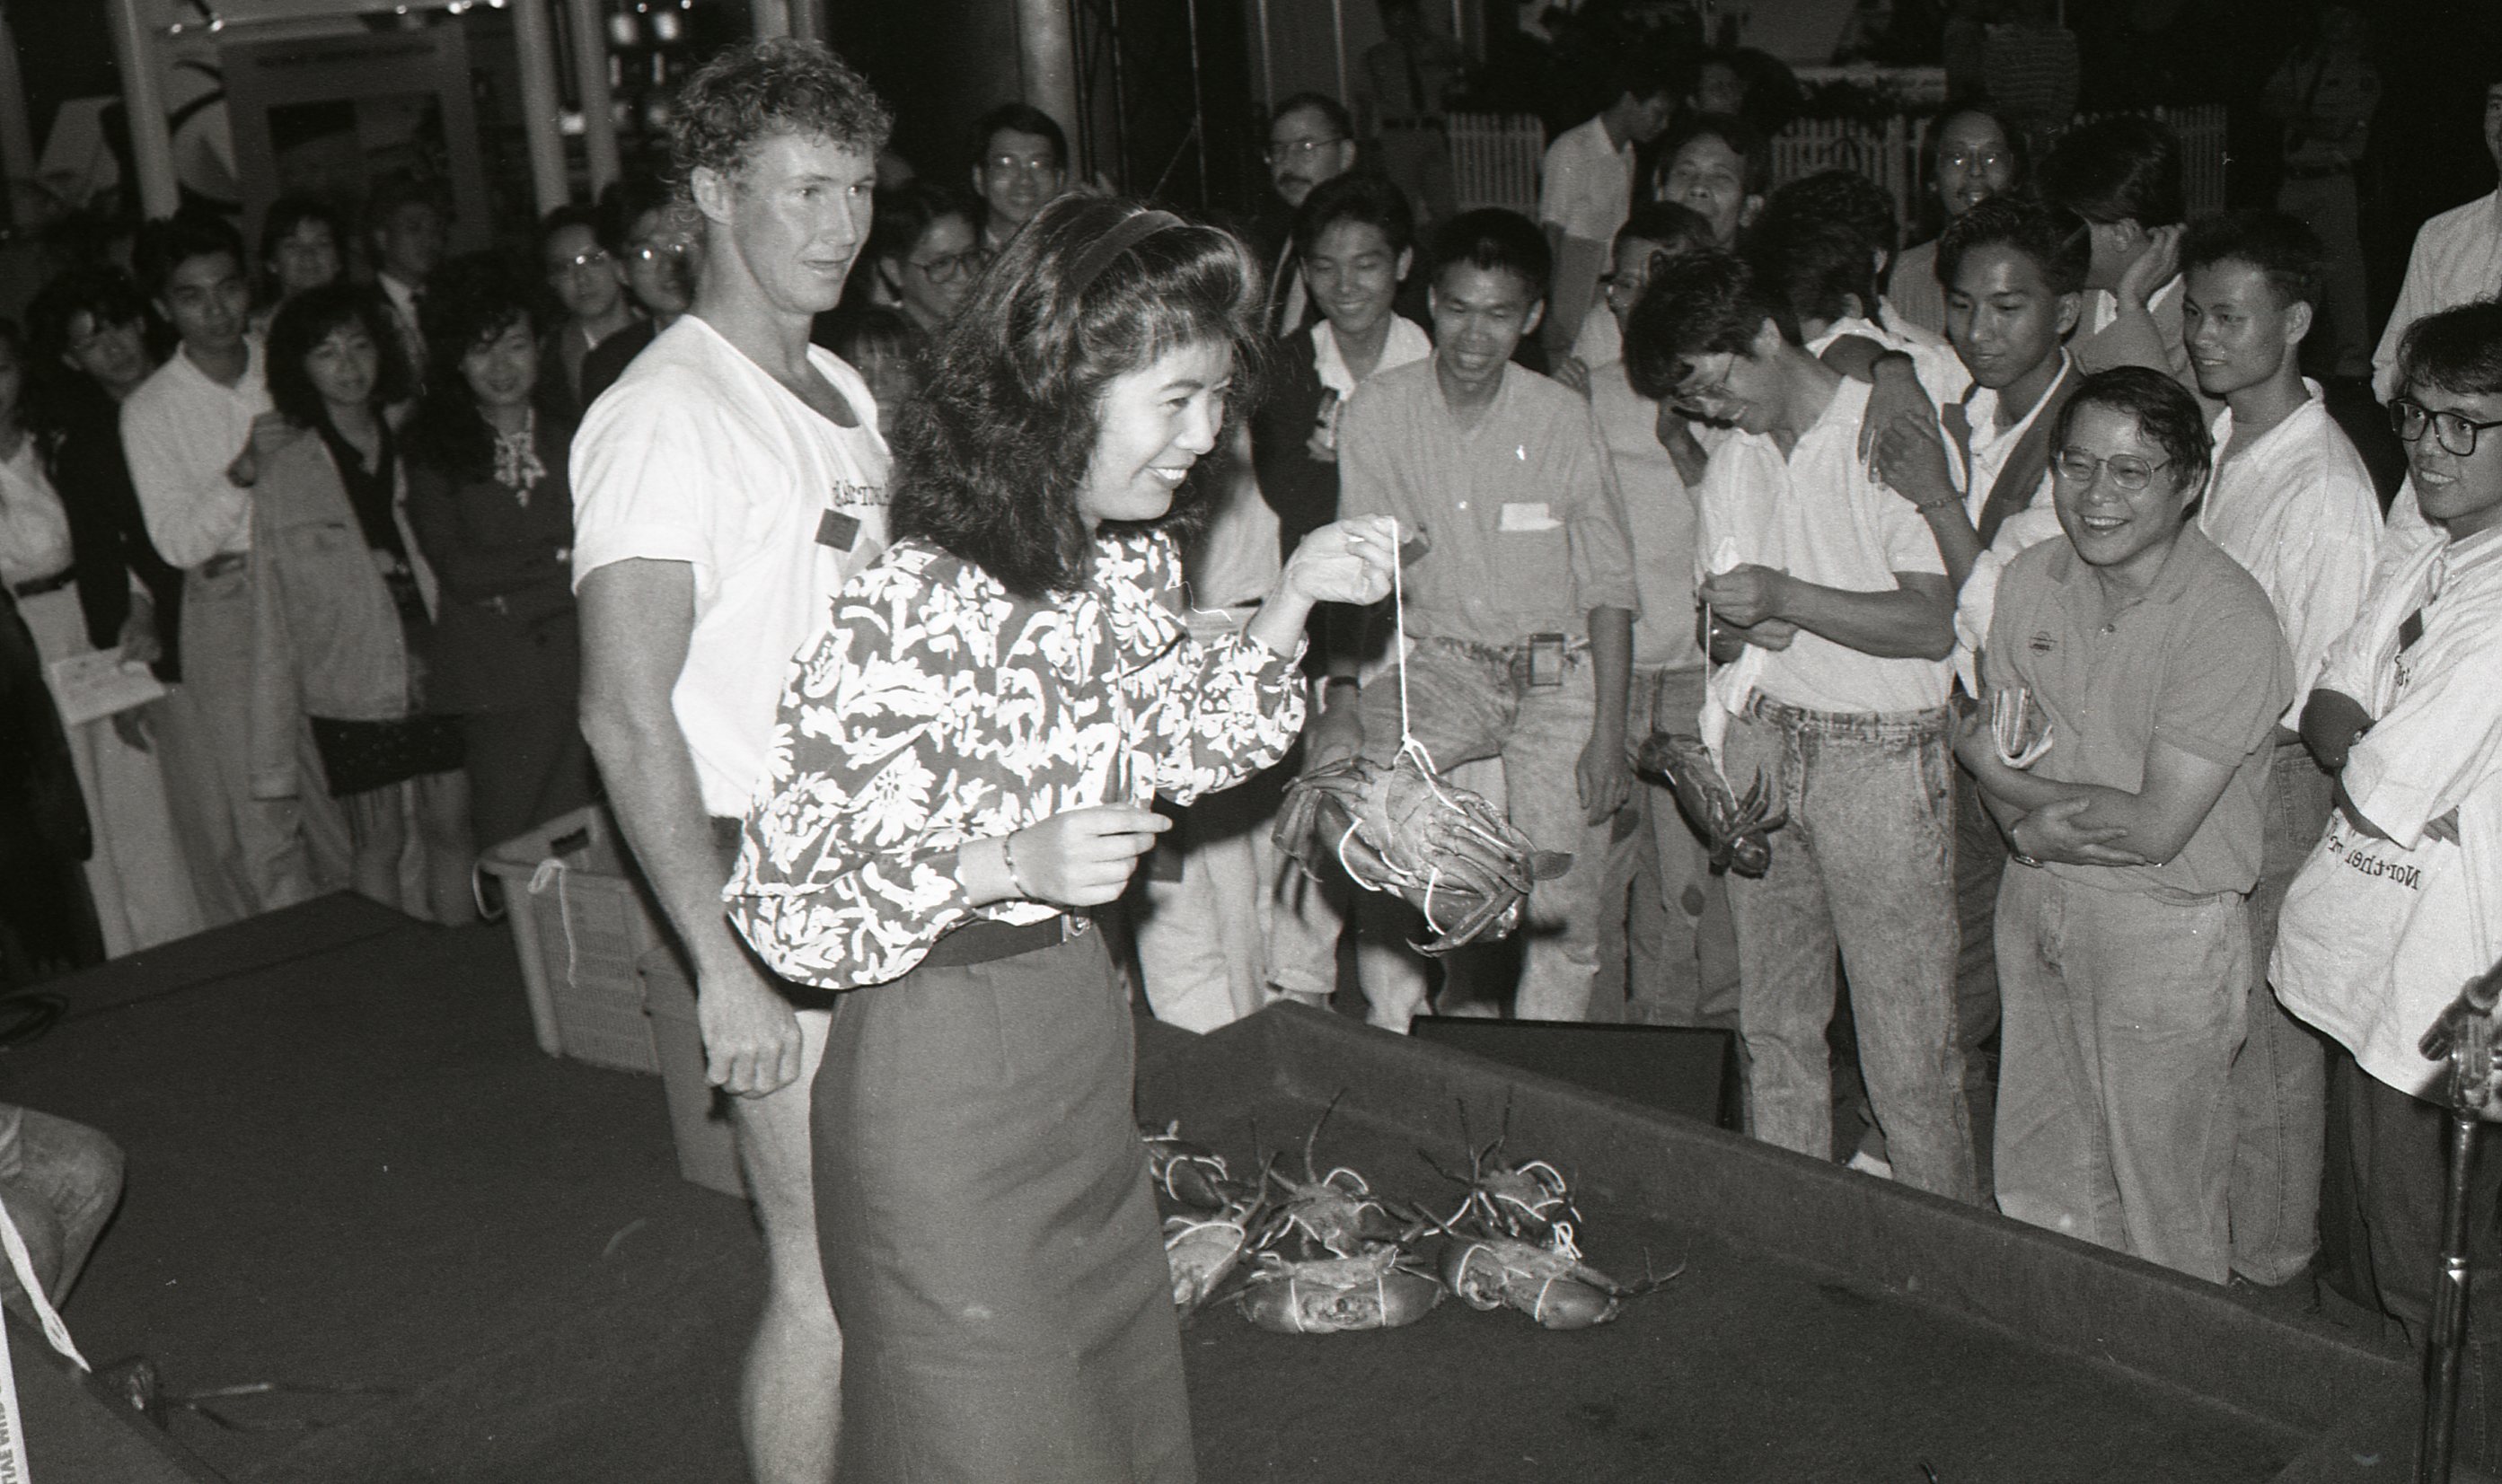 Hong Kong World Expo, Northern Territory delegation Mud Crab Tying demonstration, October 1989<br />Image courtesy of Library & Archives NT,  Department of the Chief Minister, NTRS 3823 P1, Box 11, BW2876, Image 30